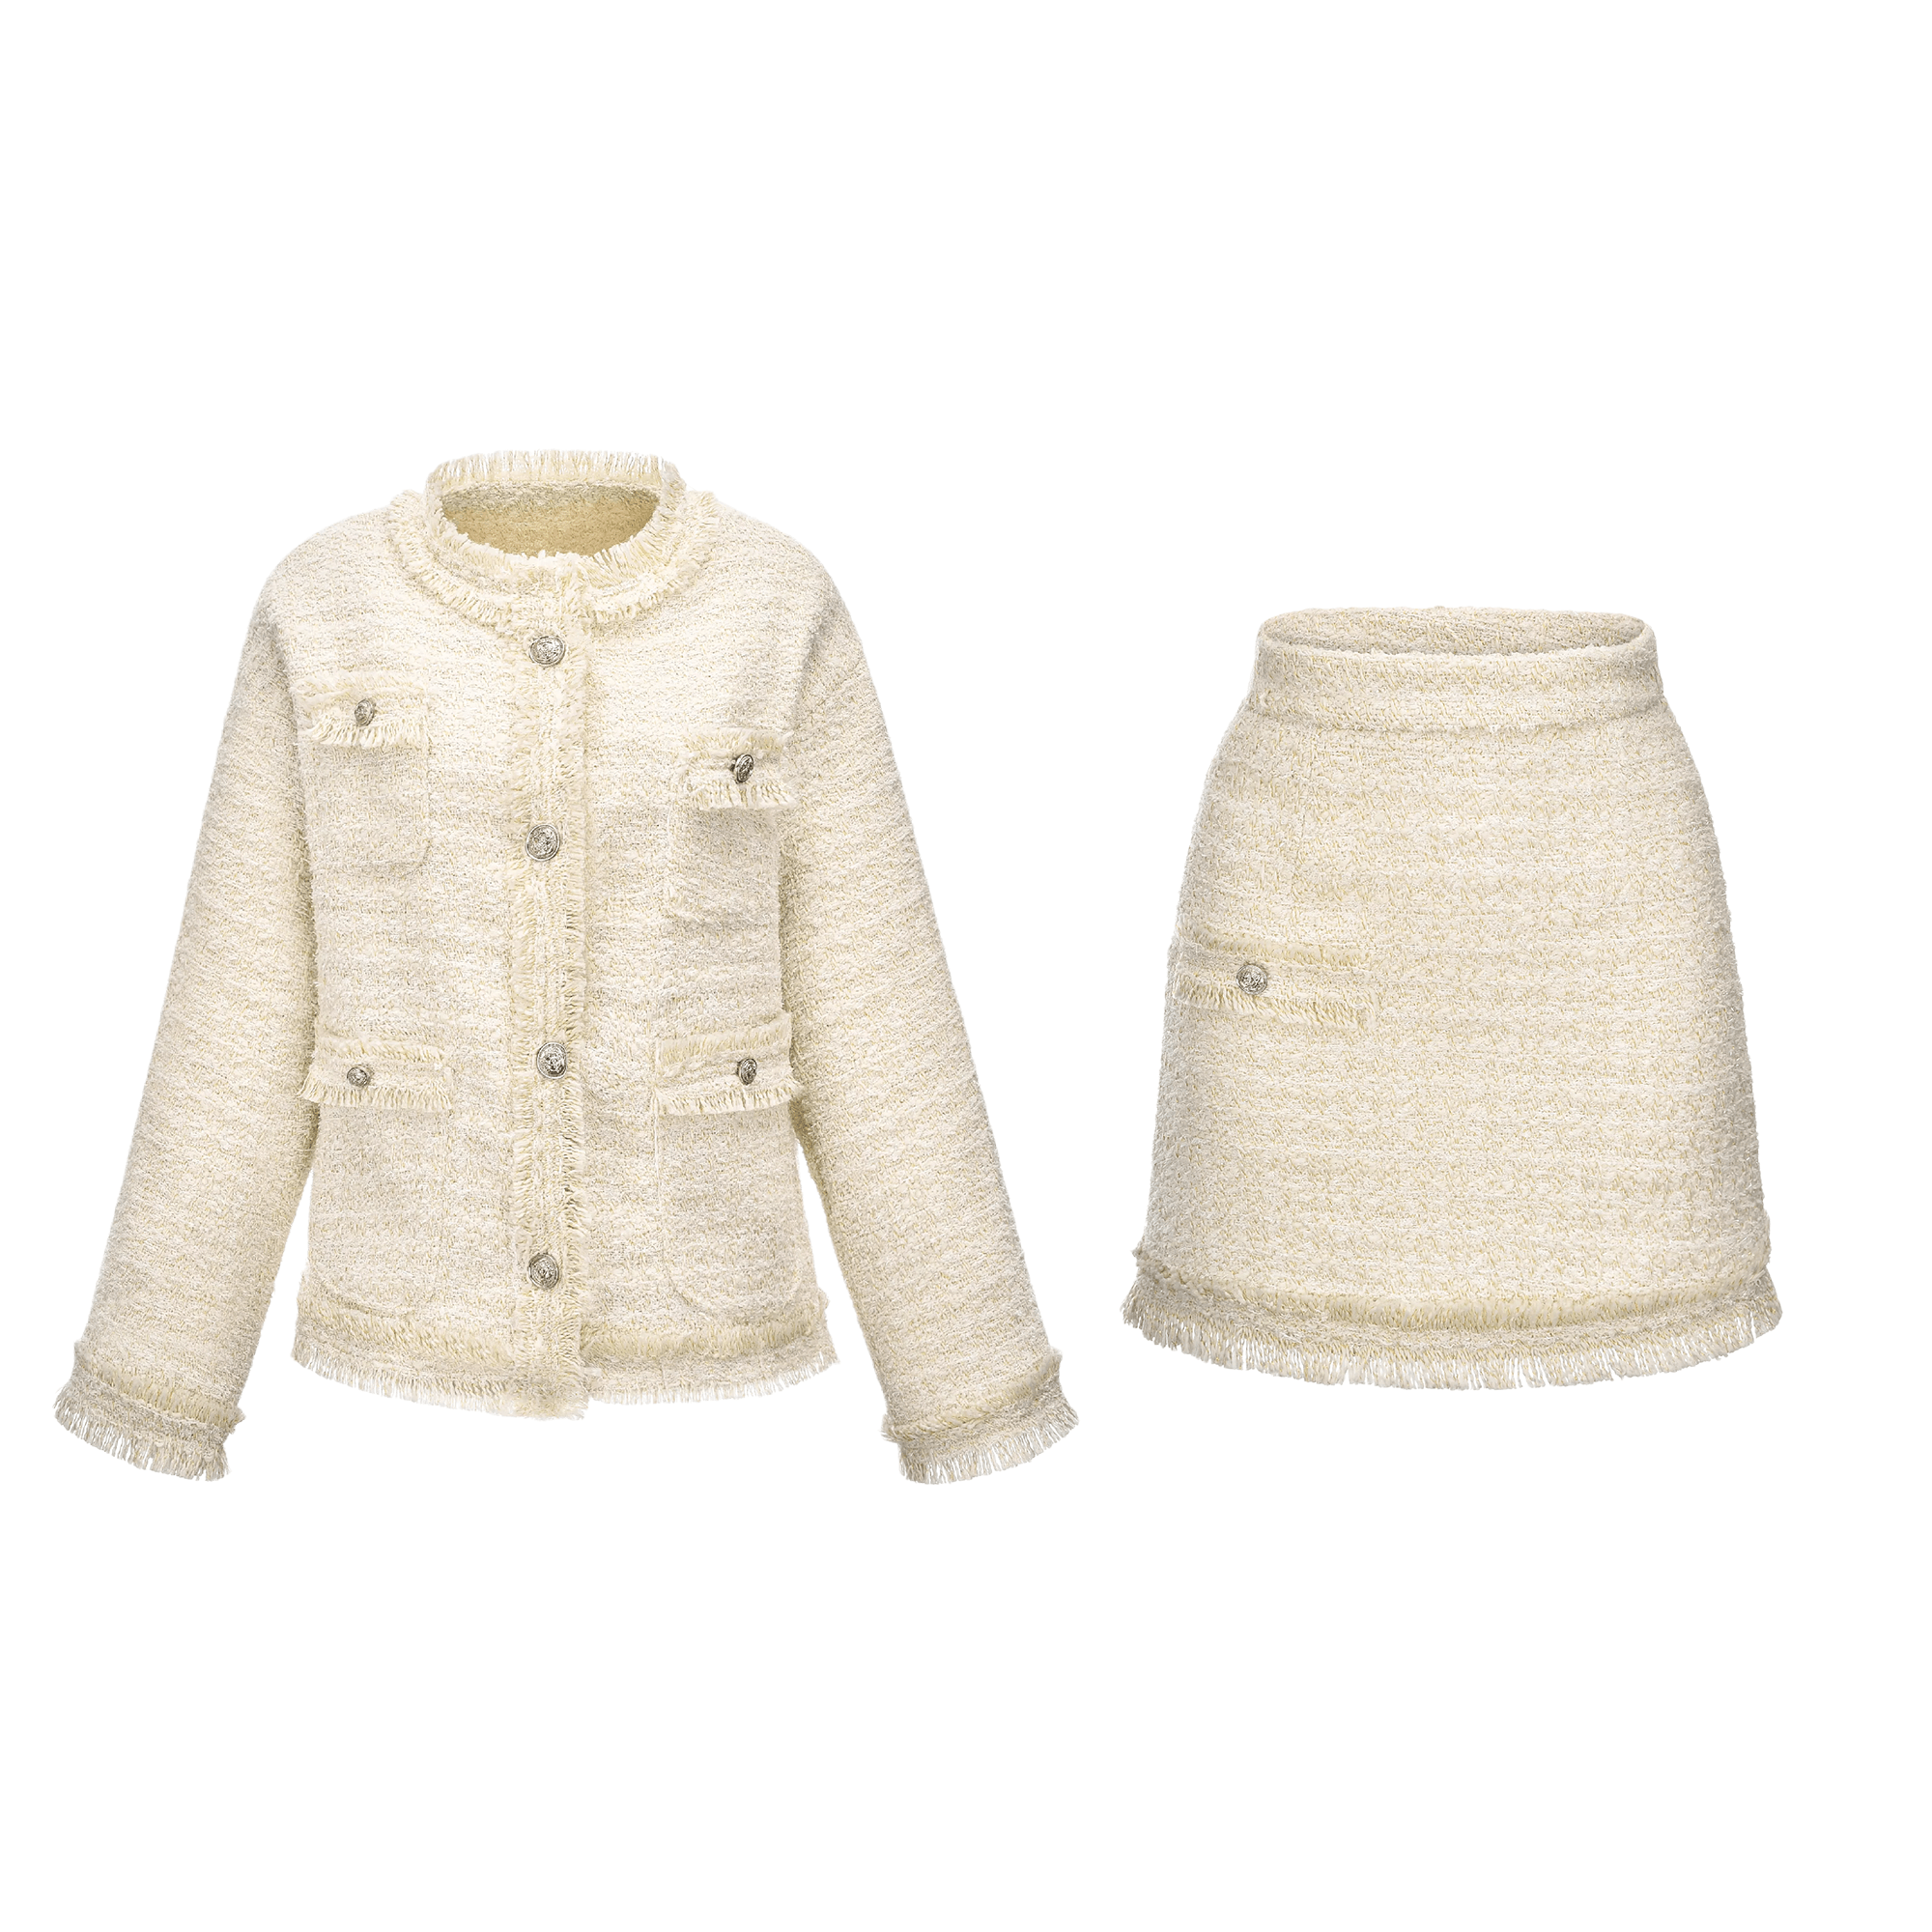 Fringed sequinned jacket & skirt matching set - itsy, it‘s different